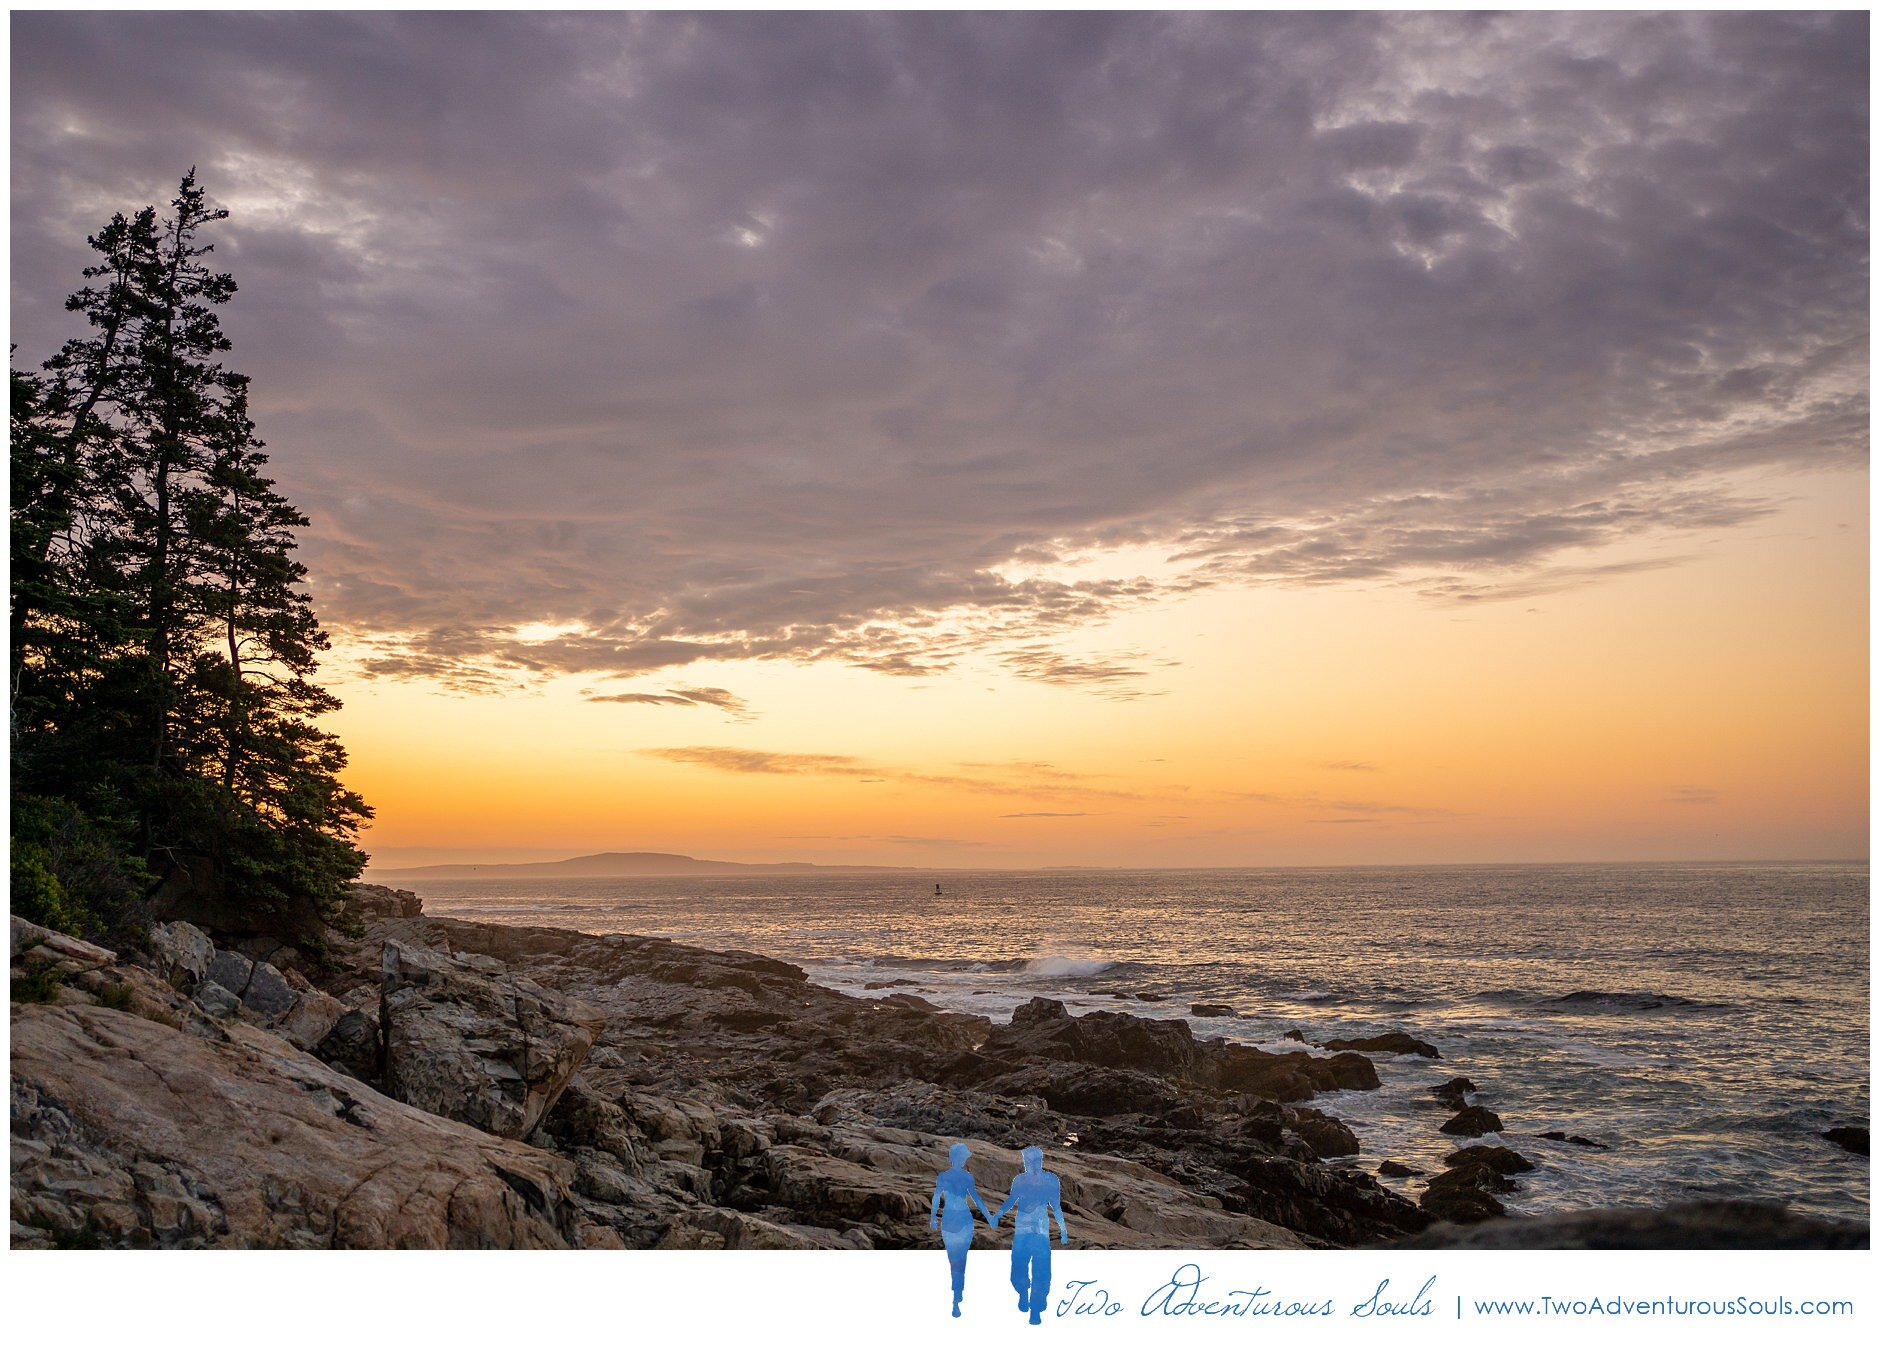 What to do in maine, Maine wedding Photographers, Two Adventurous Souls - 062321_0001.jpg